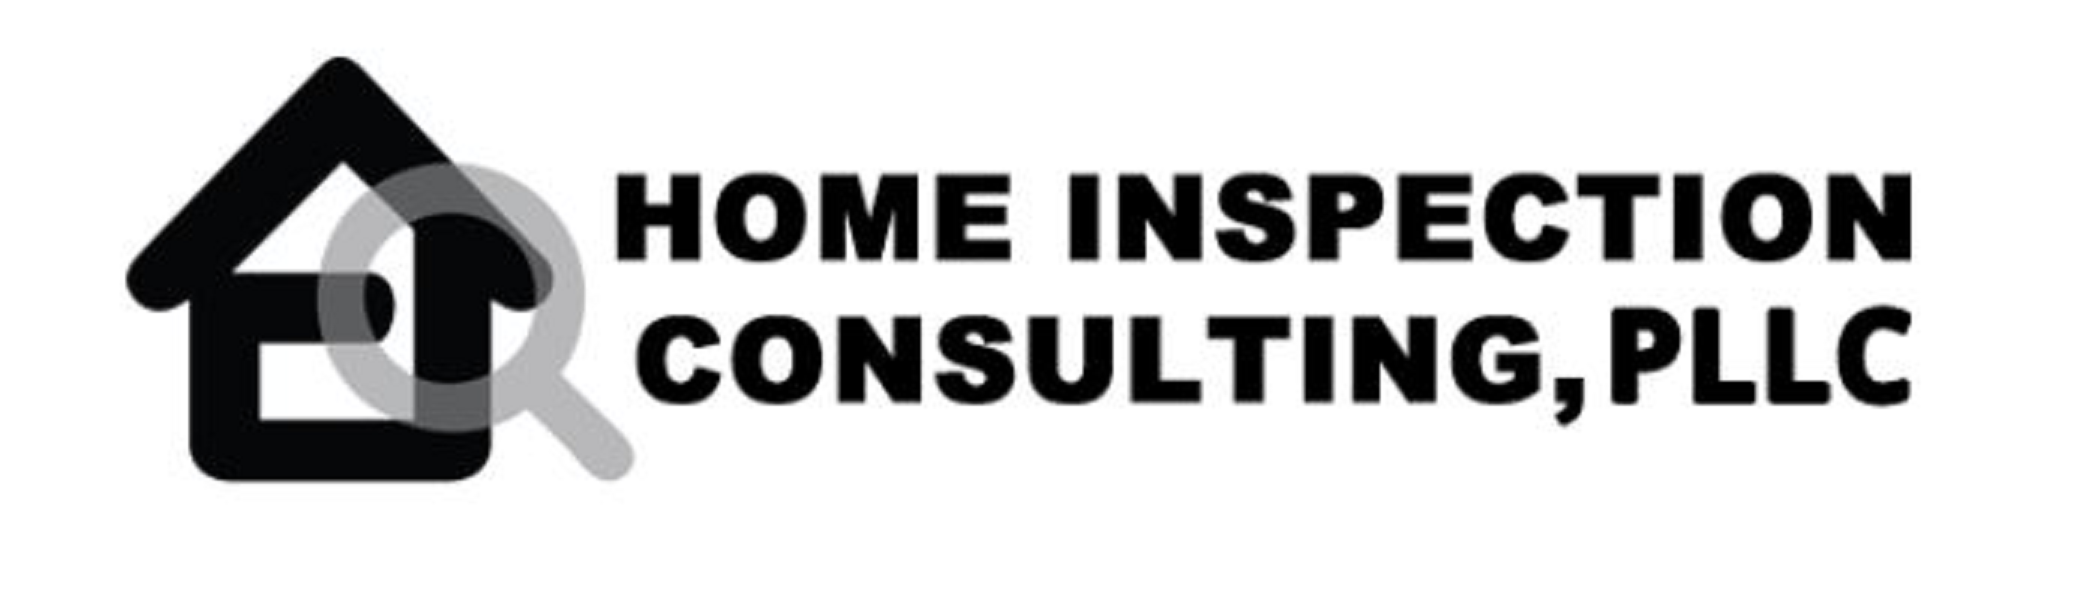 Home Inspection Consulting Logo